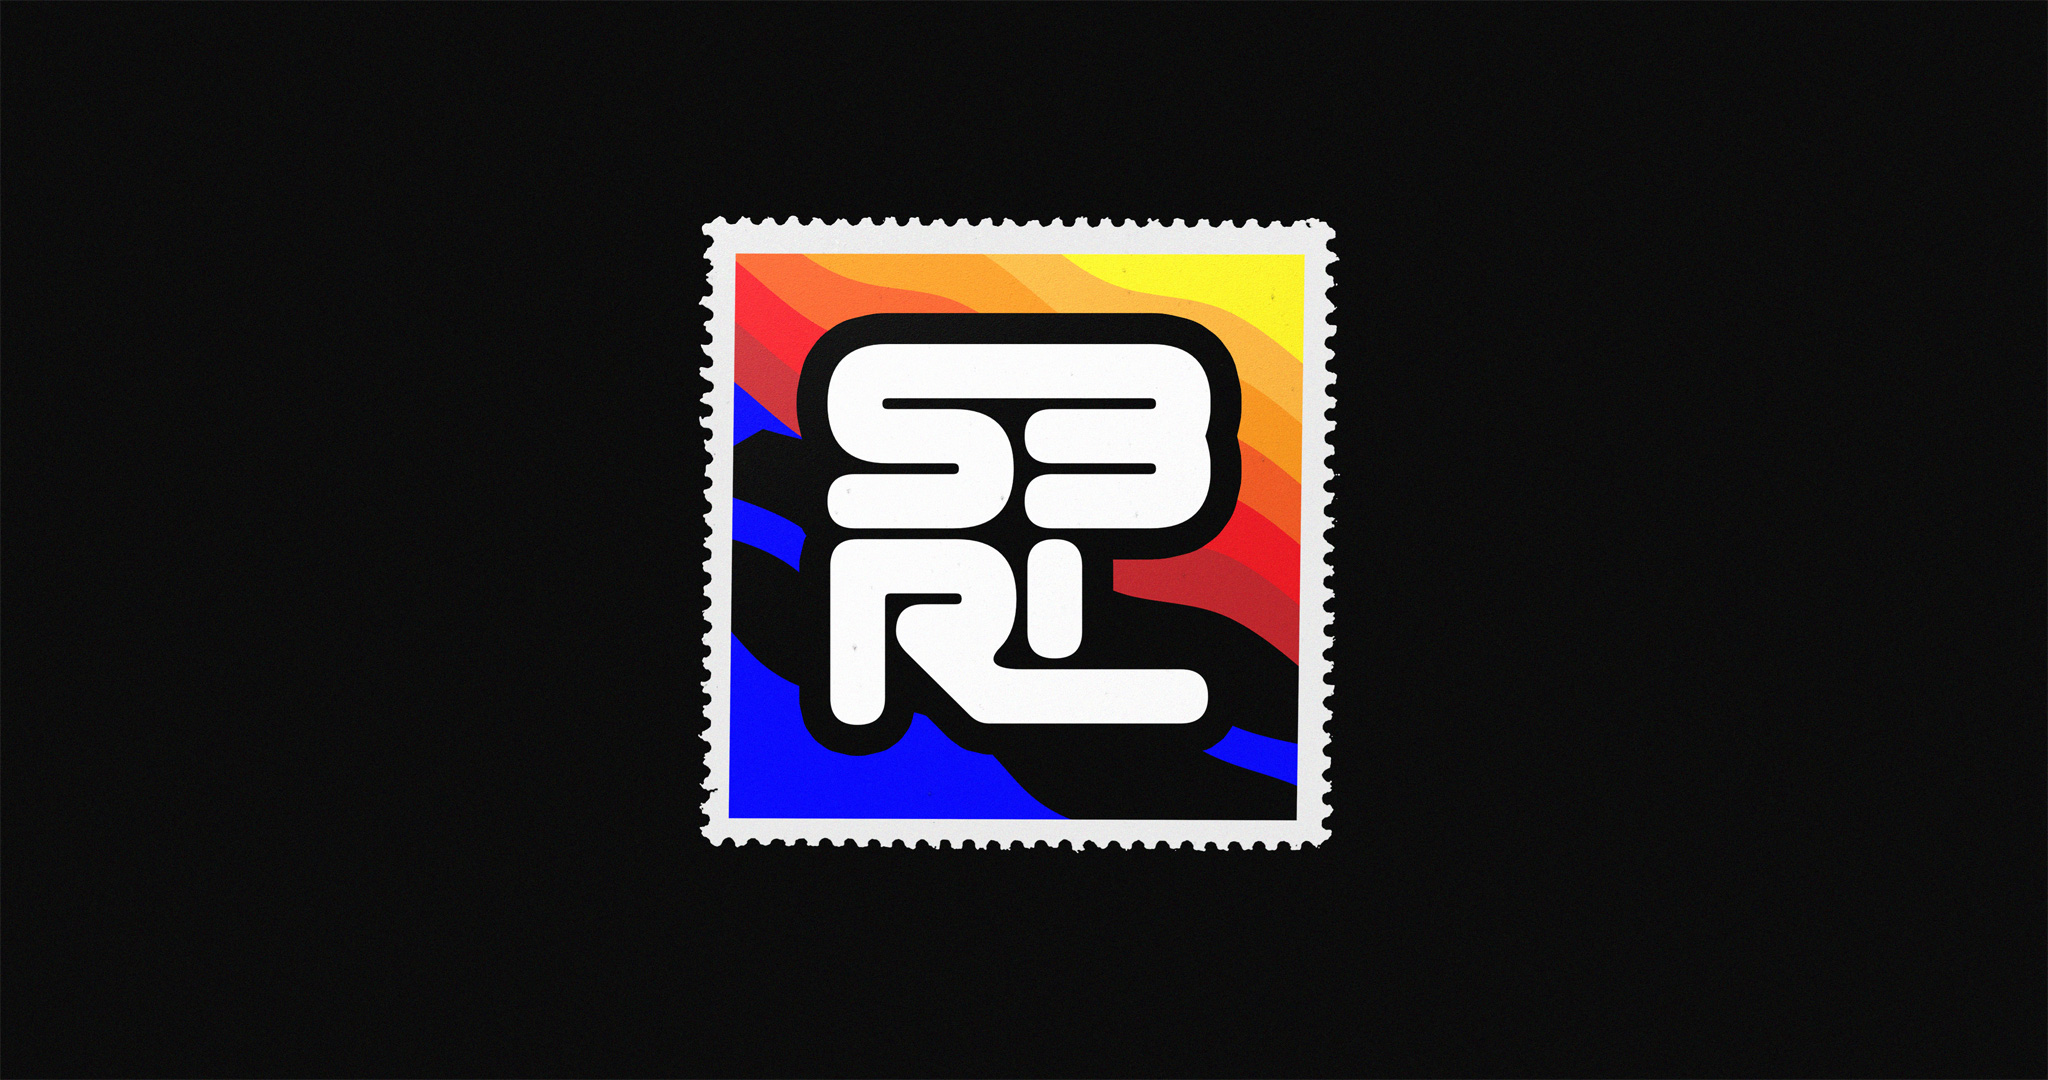 Compact, square version of the S3RL logotype on a brightly colored paper stamp.